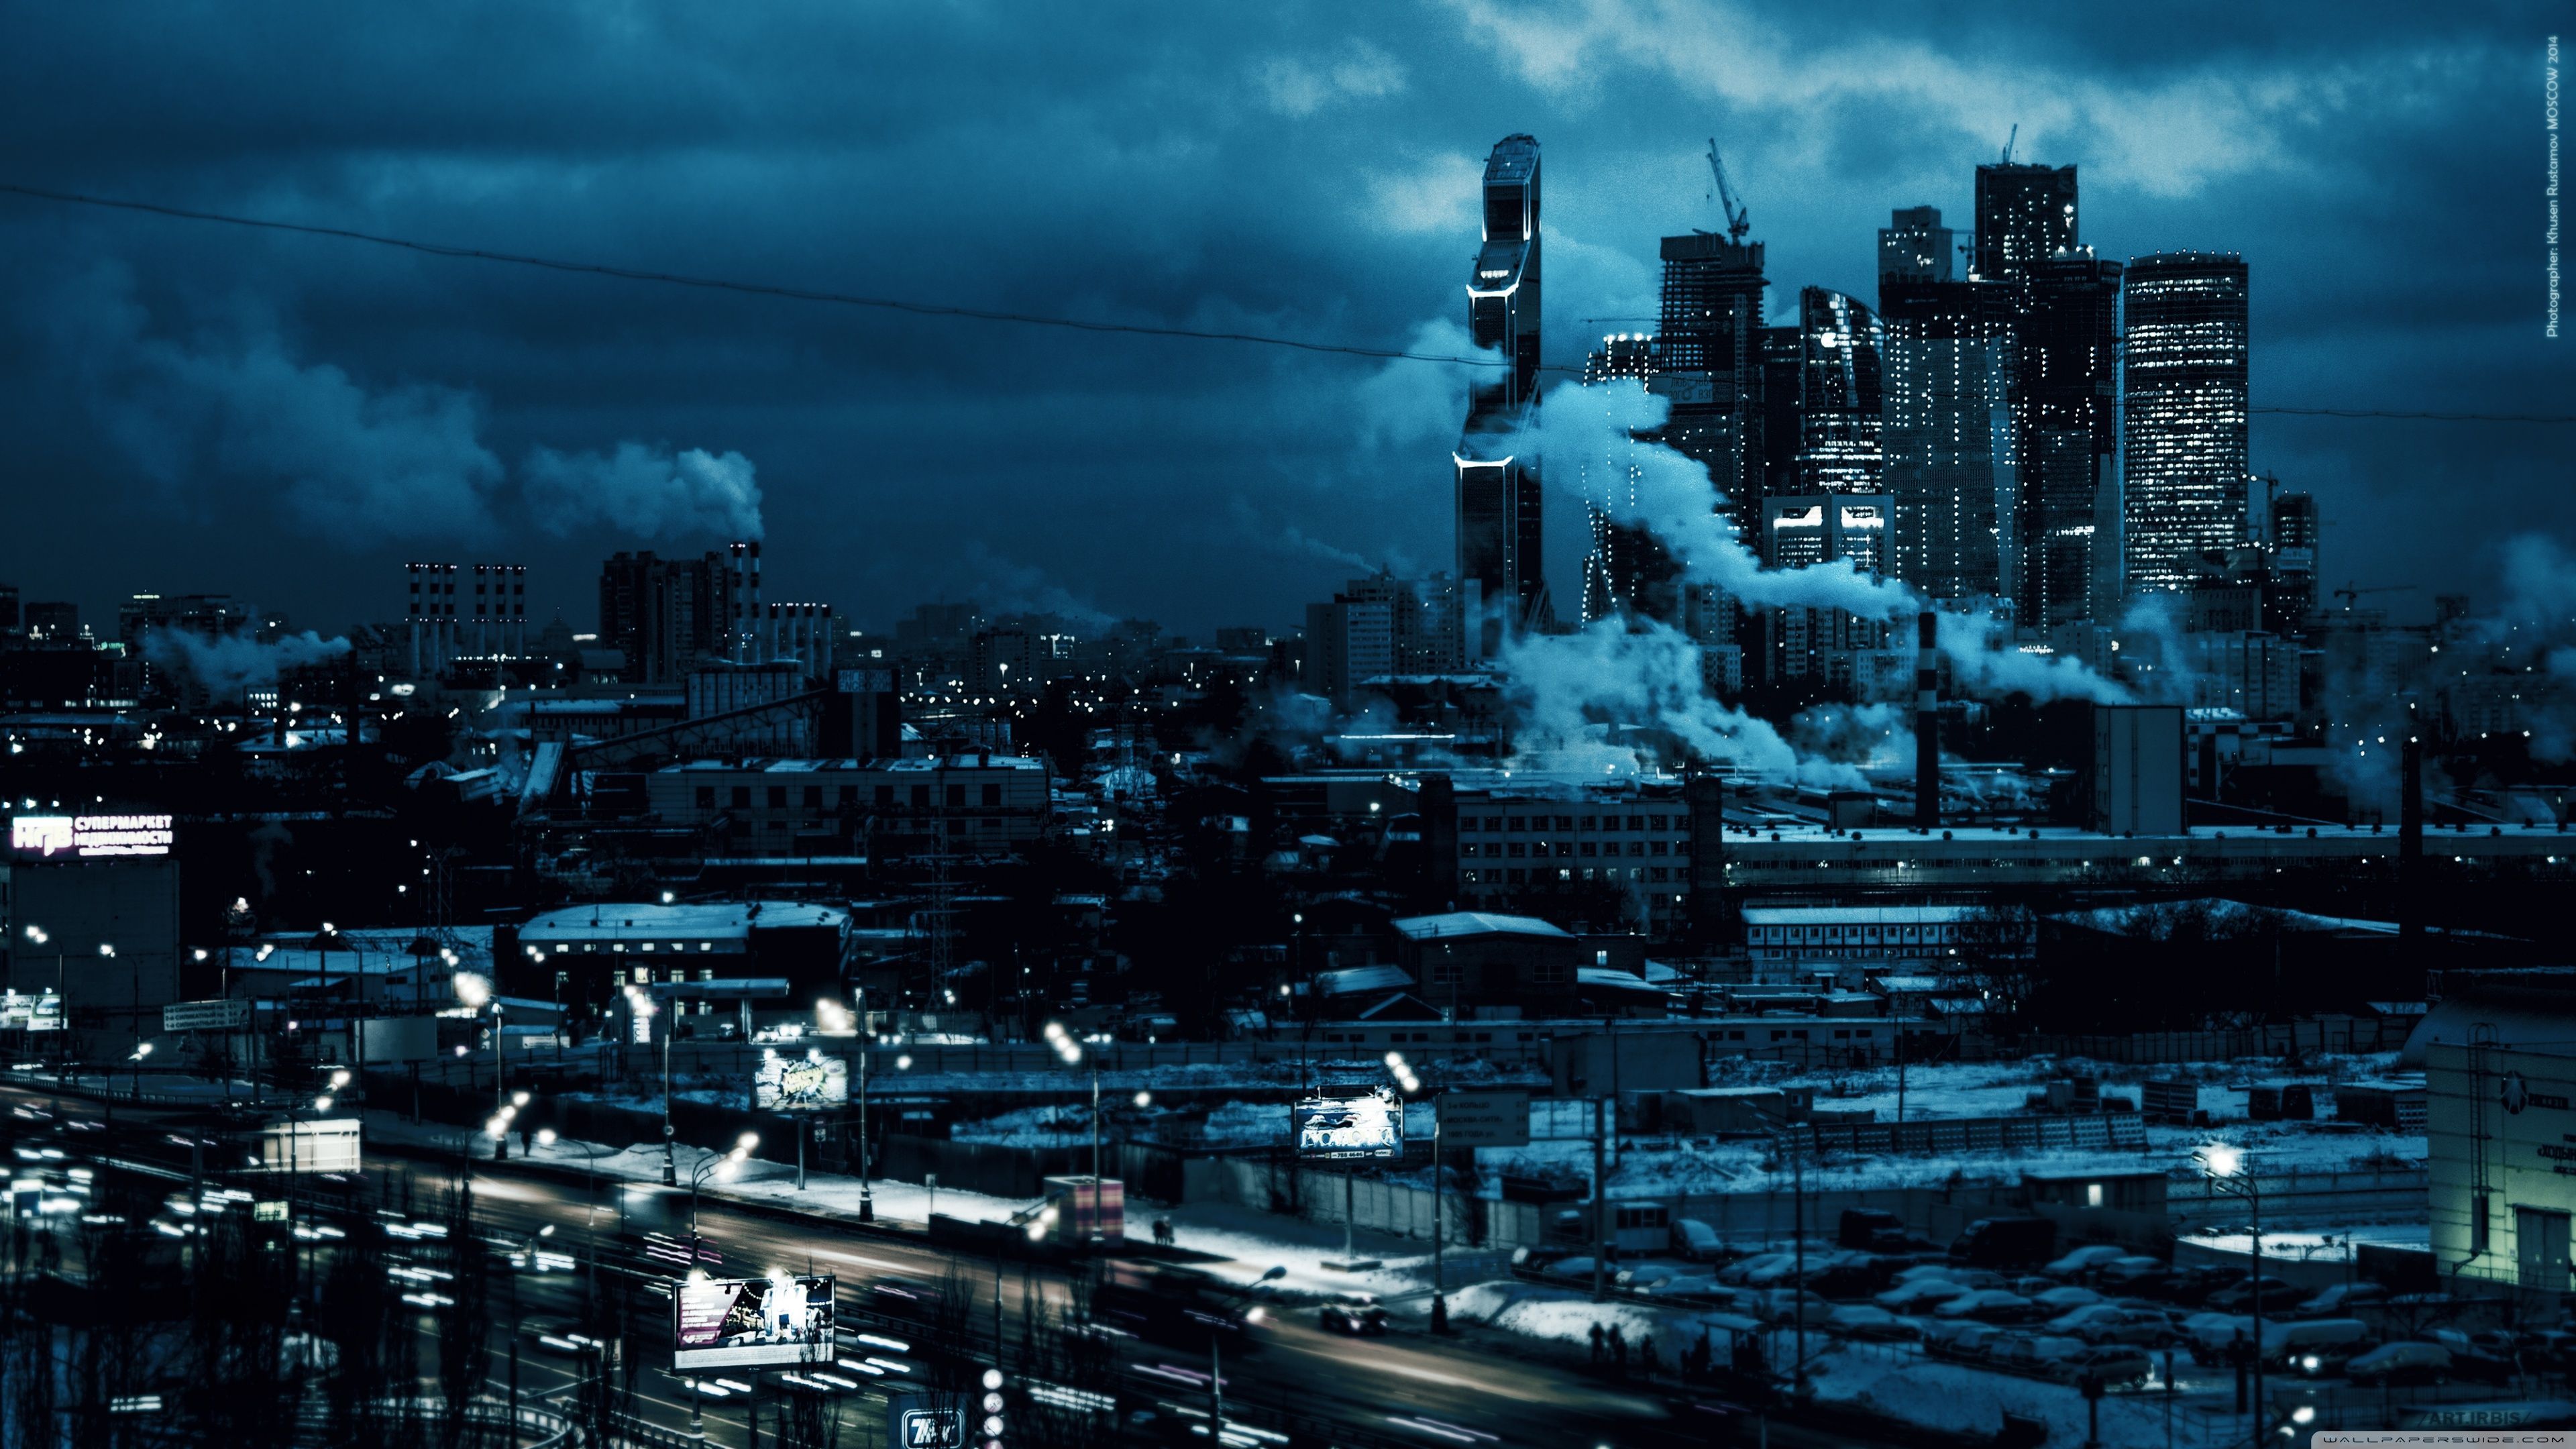 Moscow city 2014 ART.IRBIS Production Wallpaper Full HD [3840x2160 ...